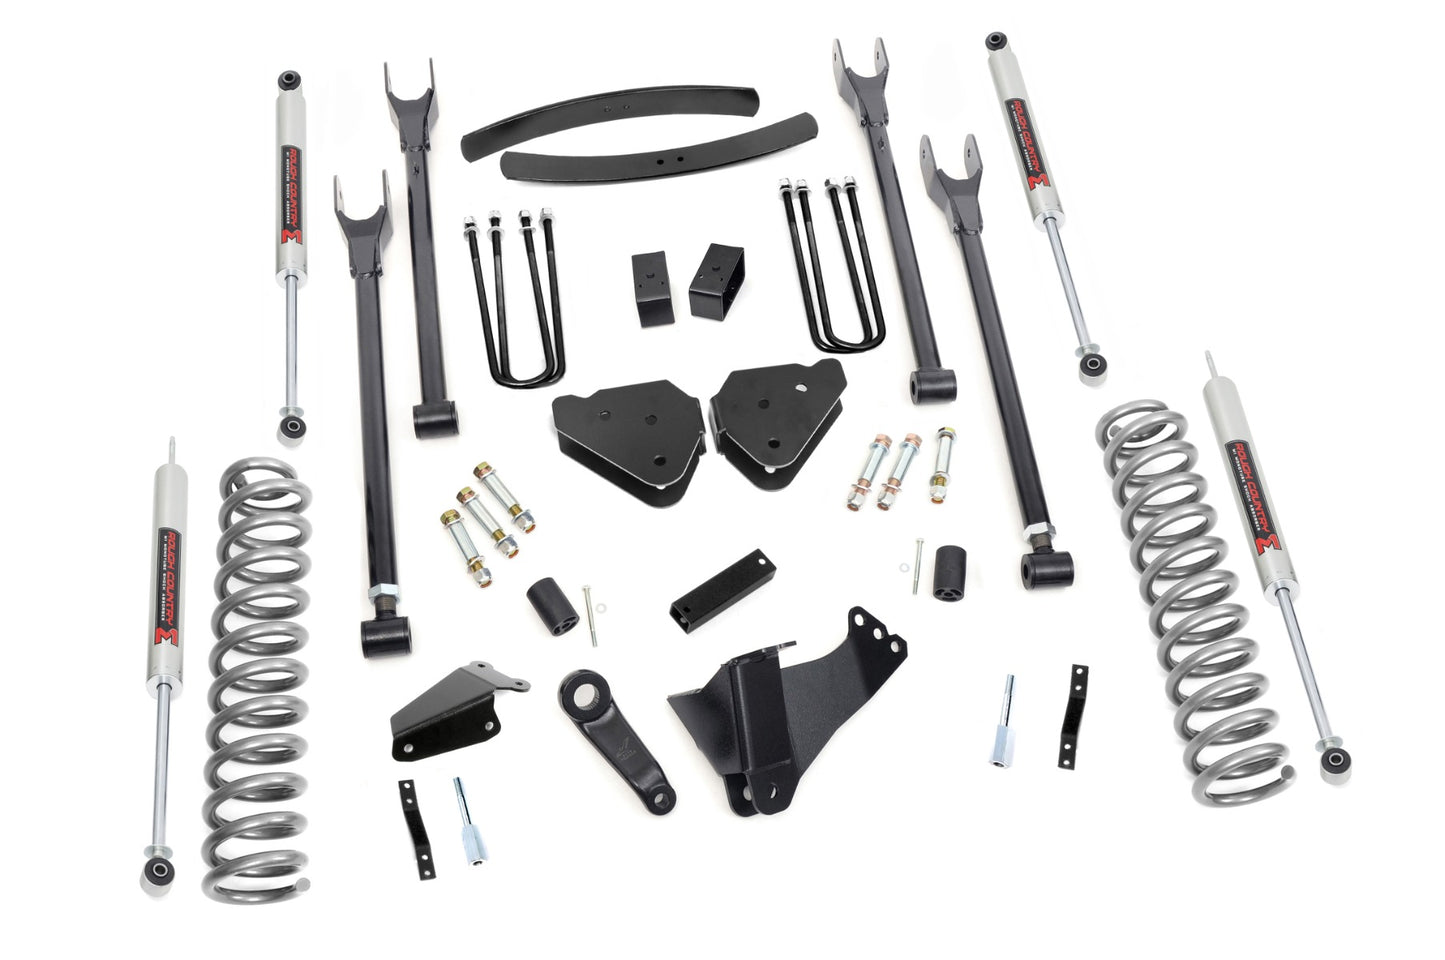 Rough Country (57940) 6 Inch Lift Kit | Diesel | 4 Link | M1 | Ford F-250/F-350 Super Duty (05-07)